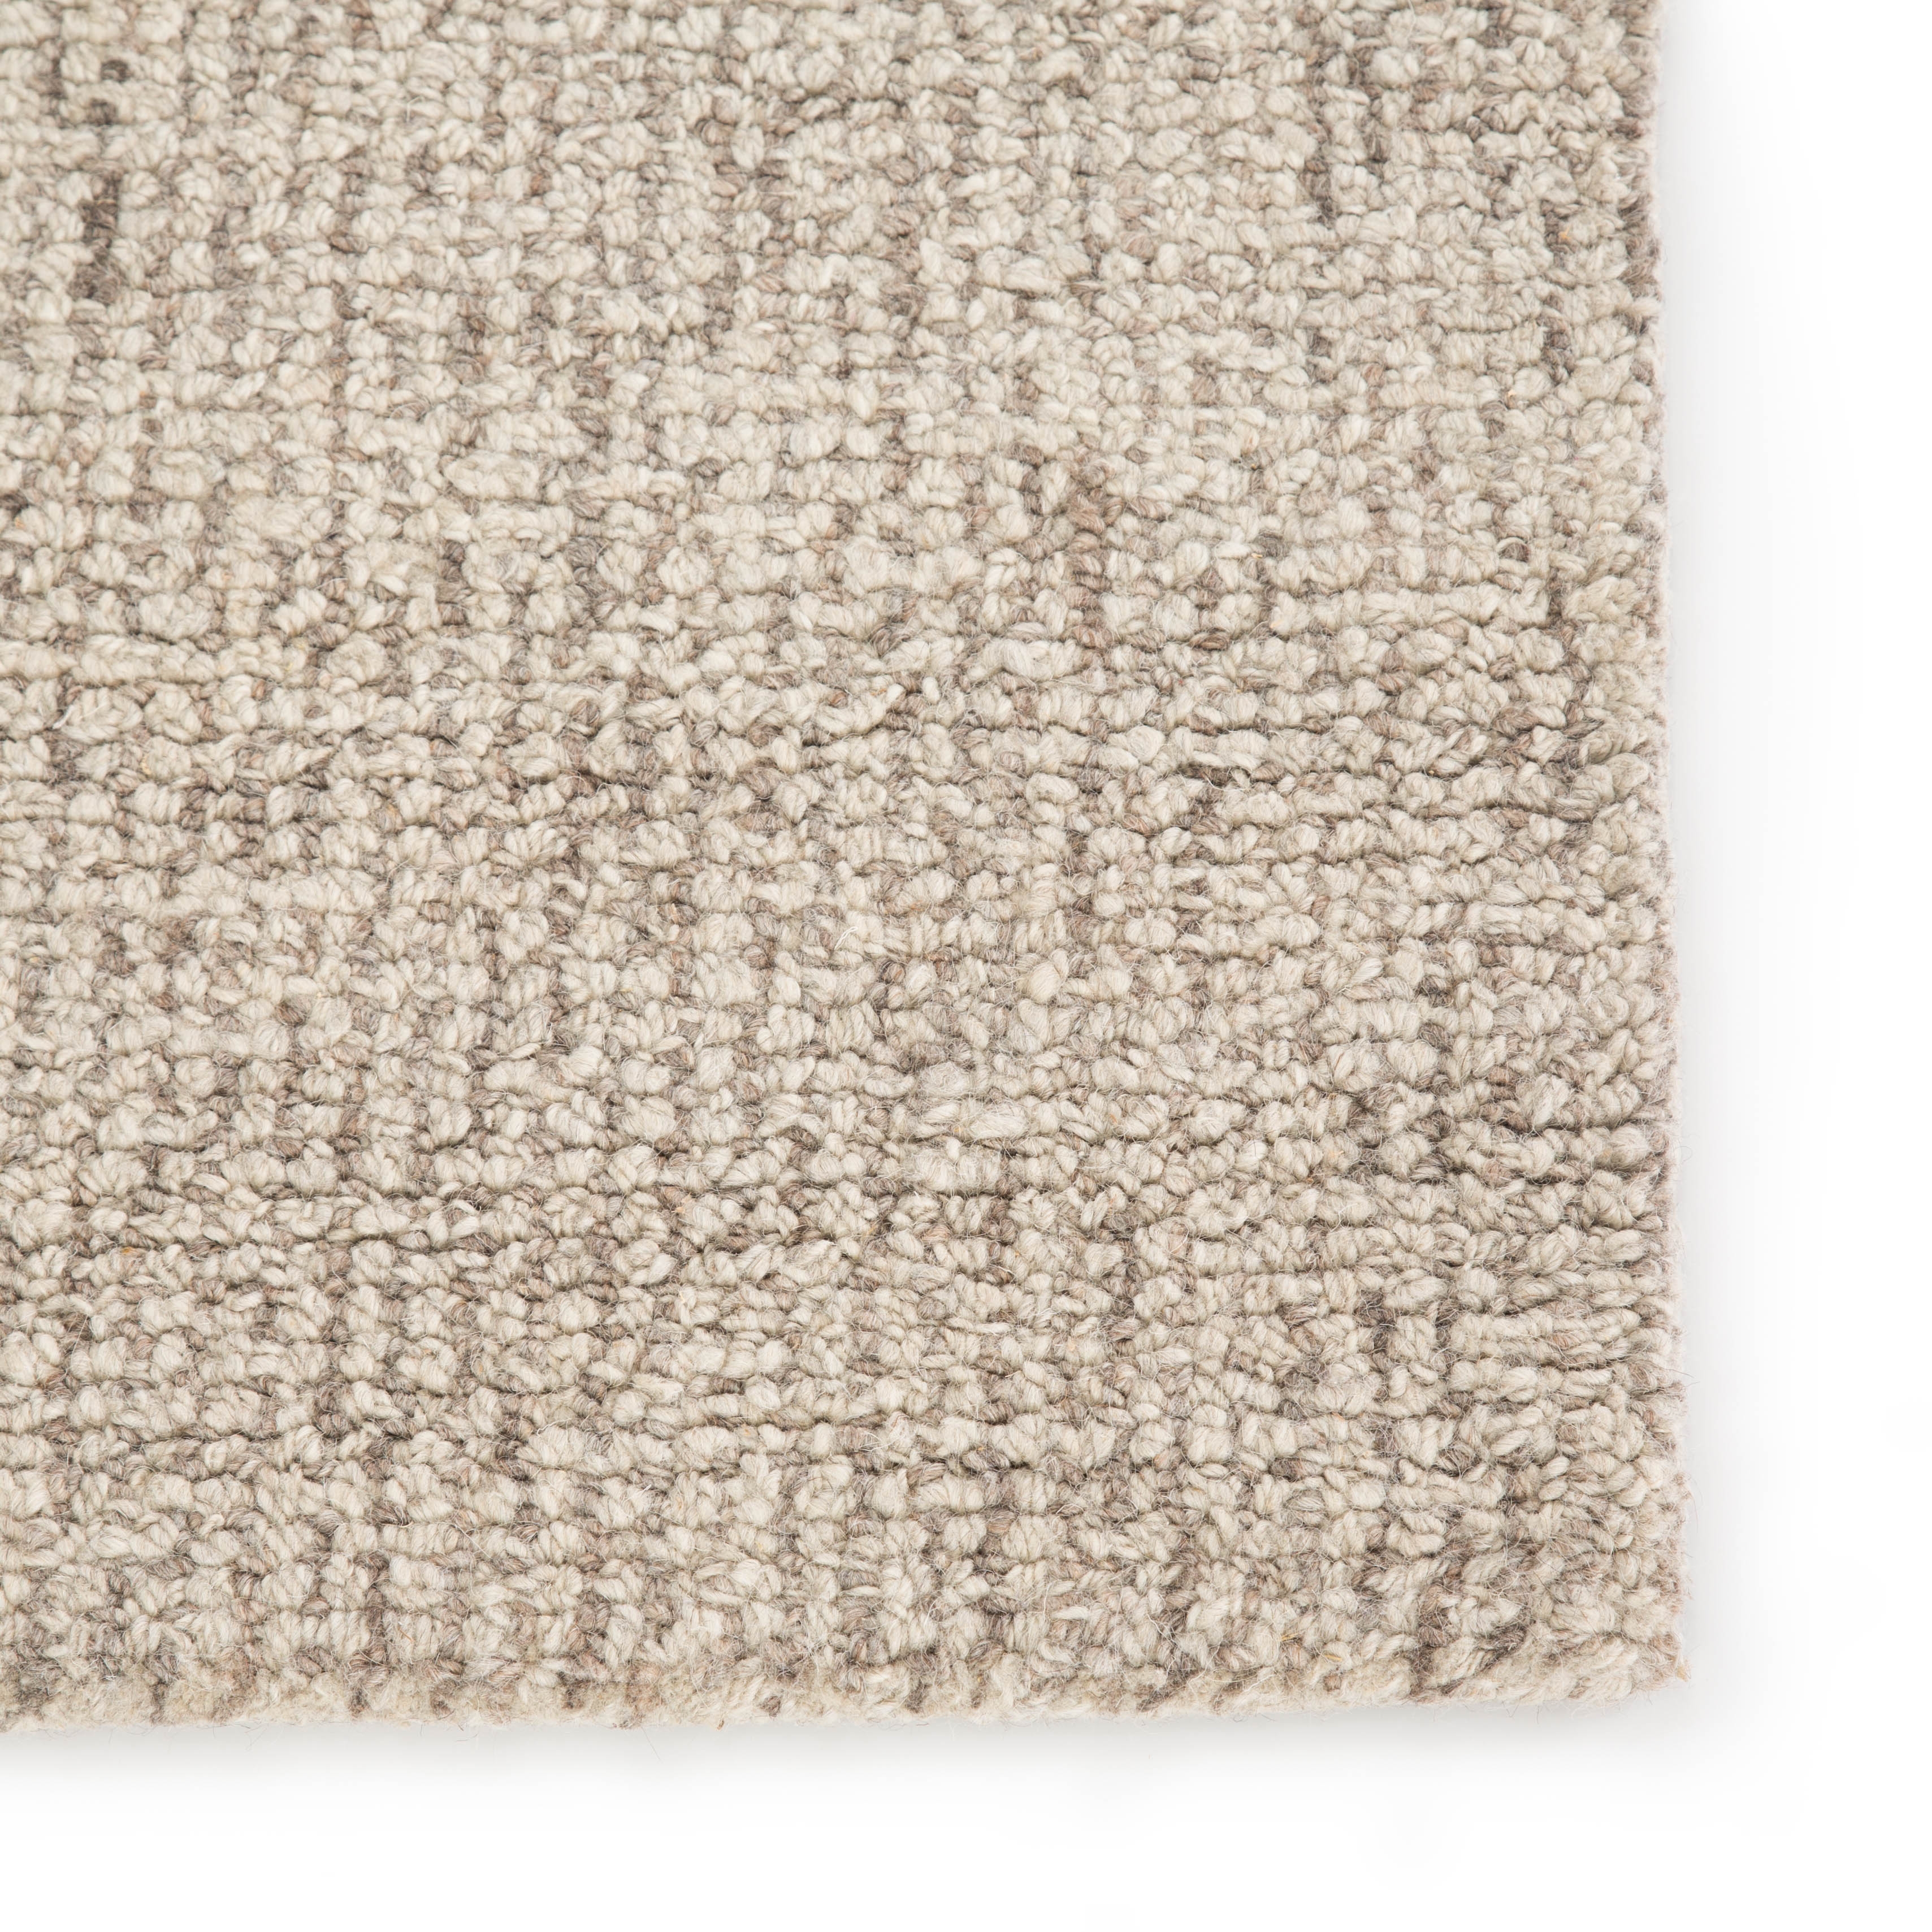 Oland Handmade Solid White/ Brown Area Rug (2' X 3') - Image 3